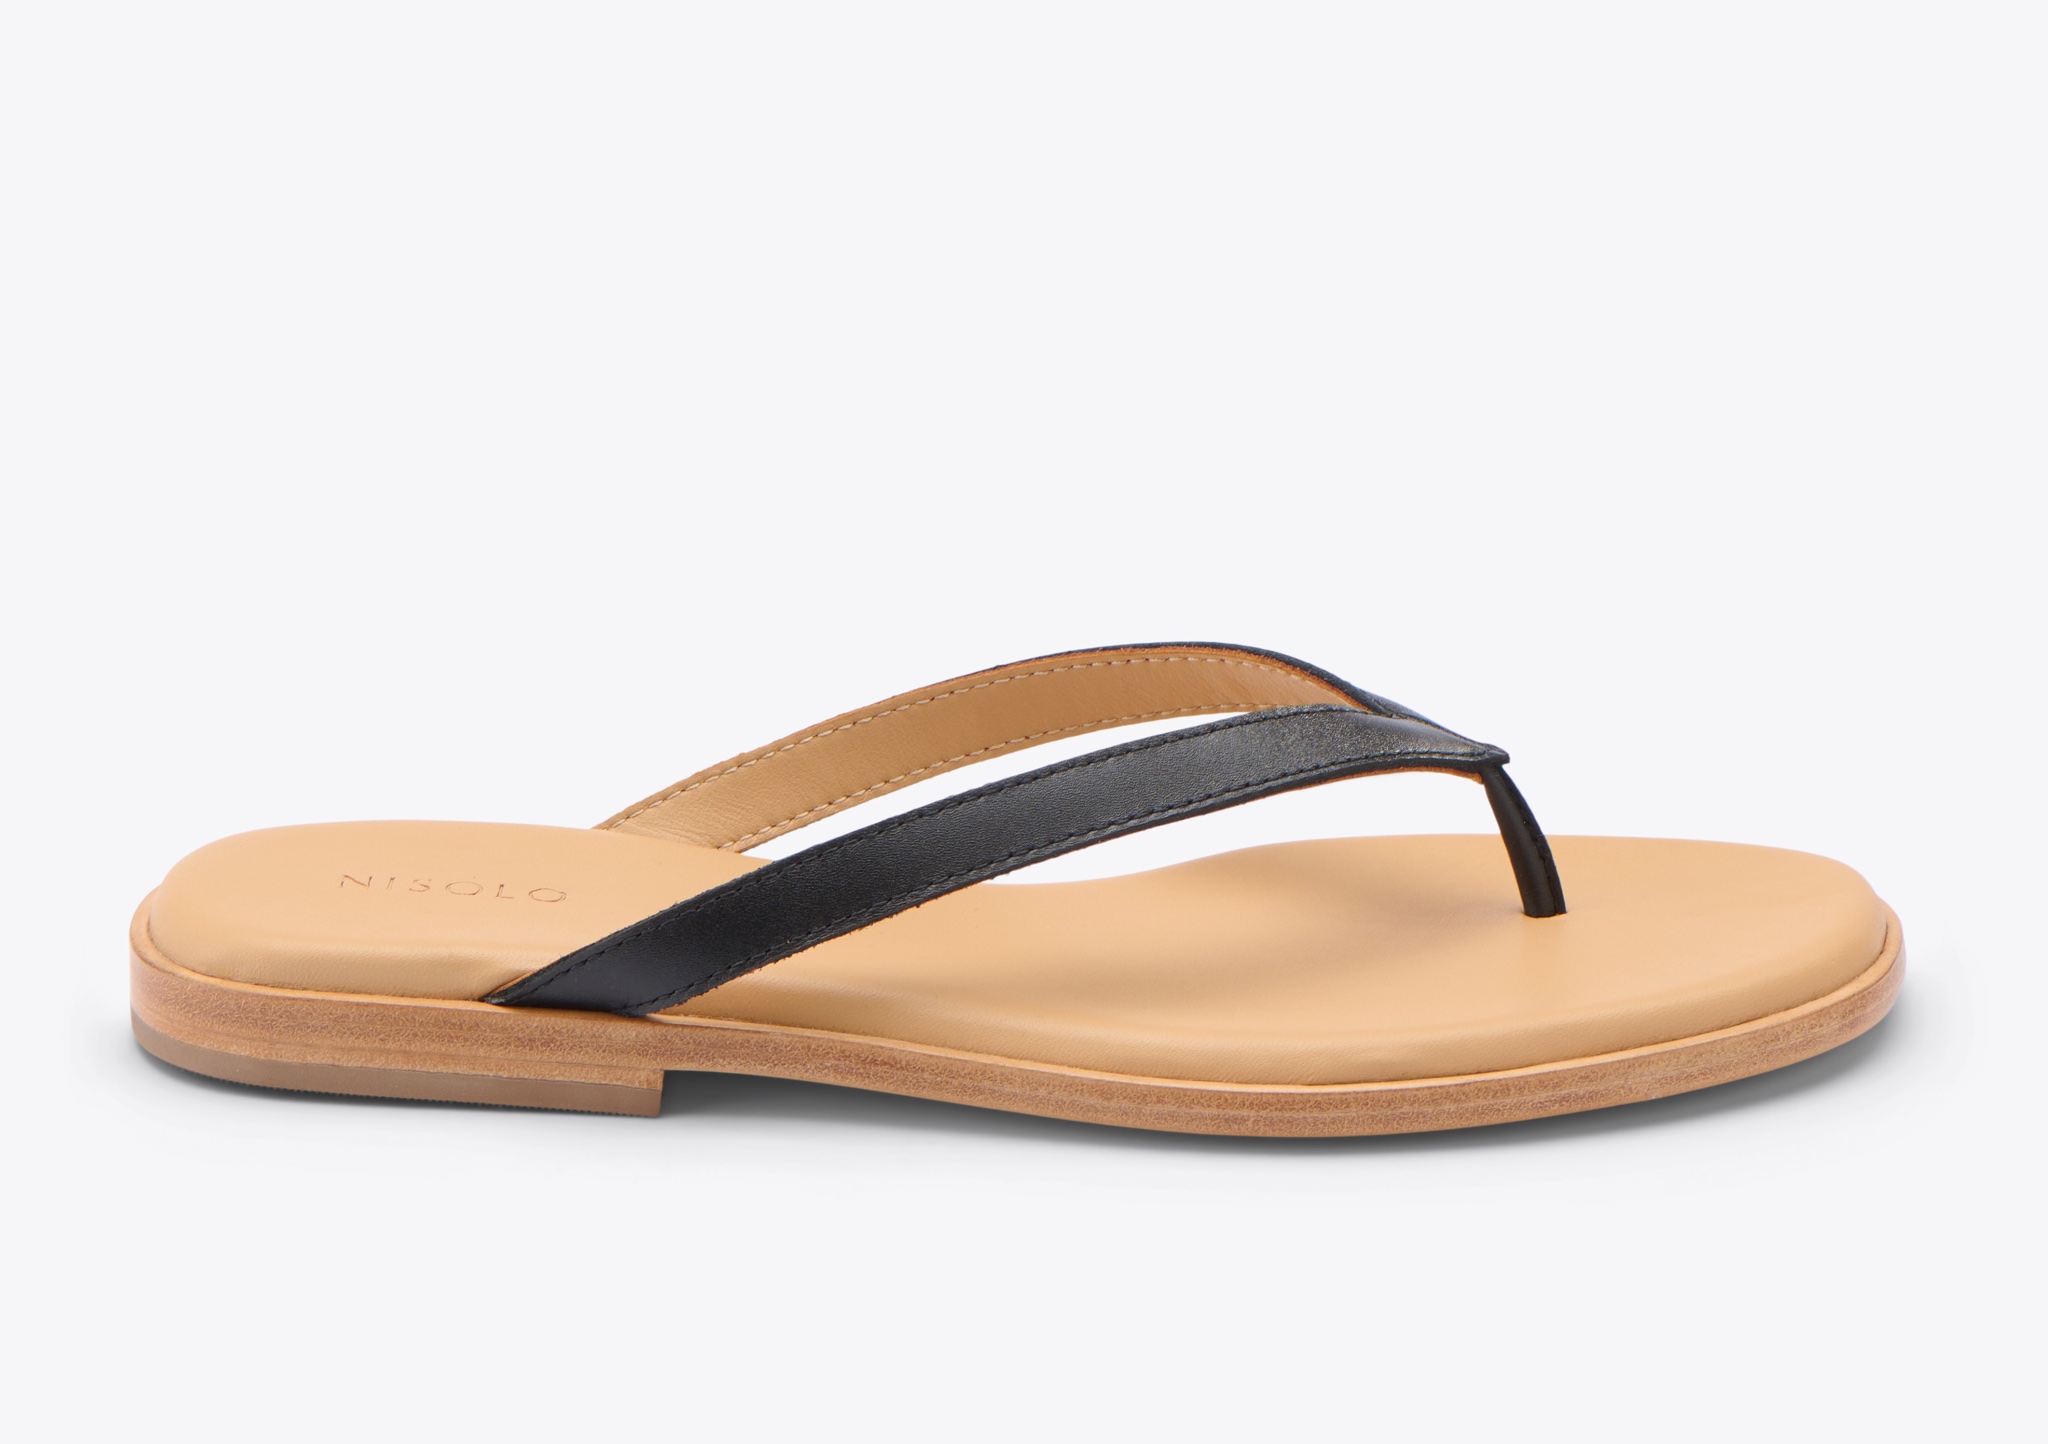 Nisolo Isabel Go-To Flip Flop Black - Every Nisolo product is built on the foundation of comfort, function, and design. 